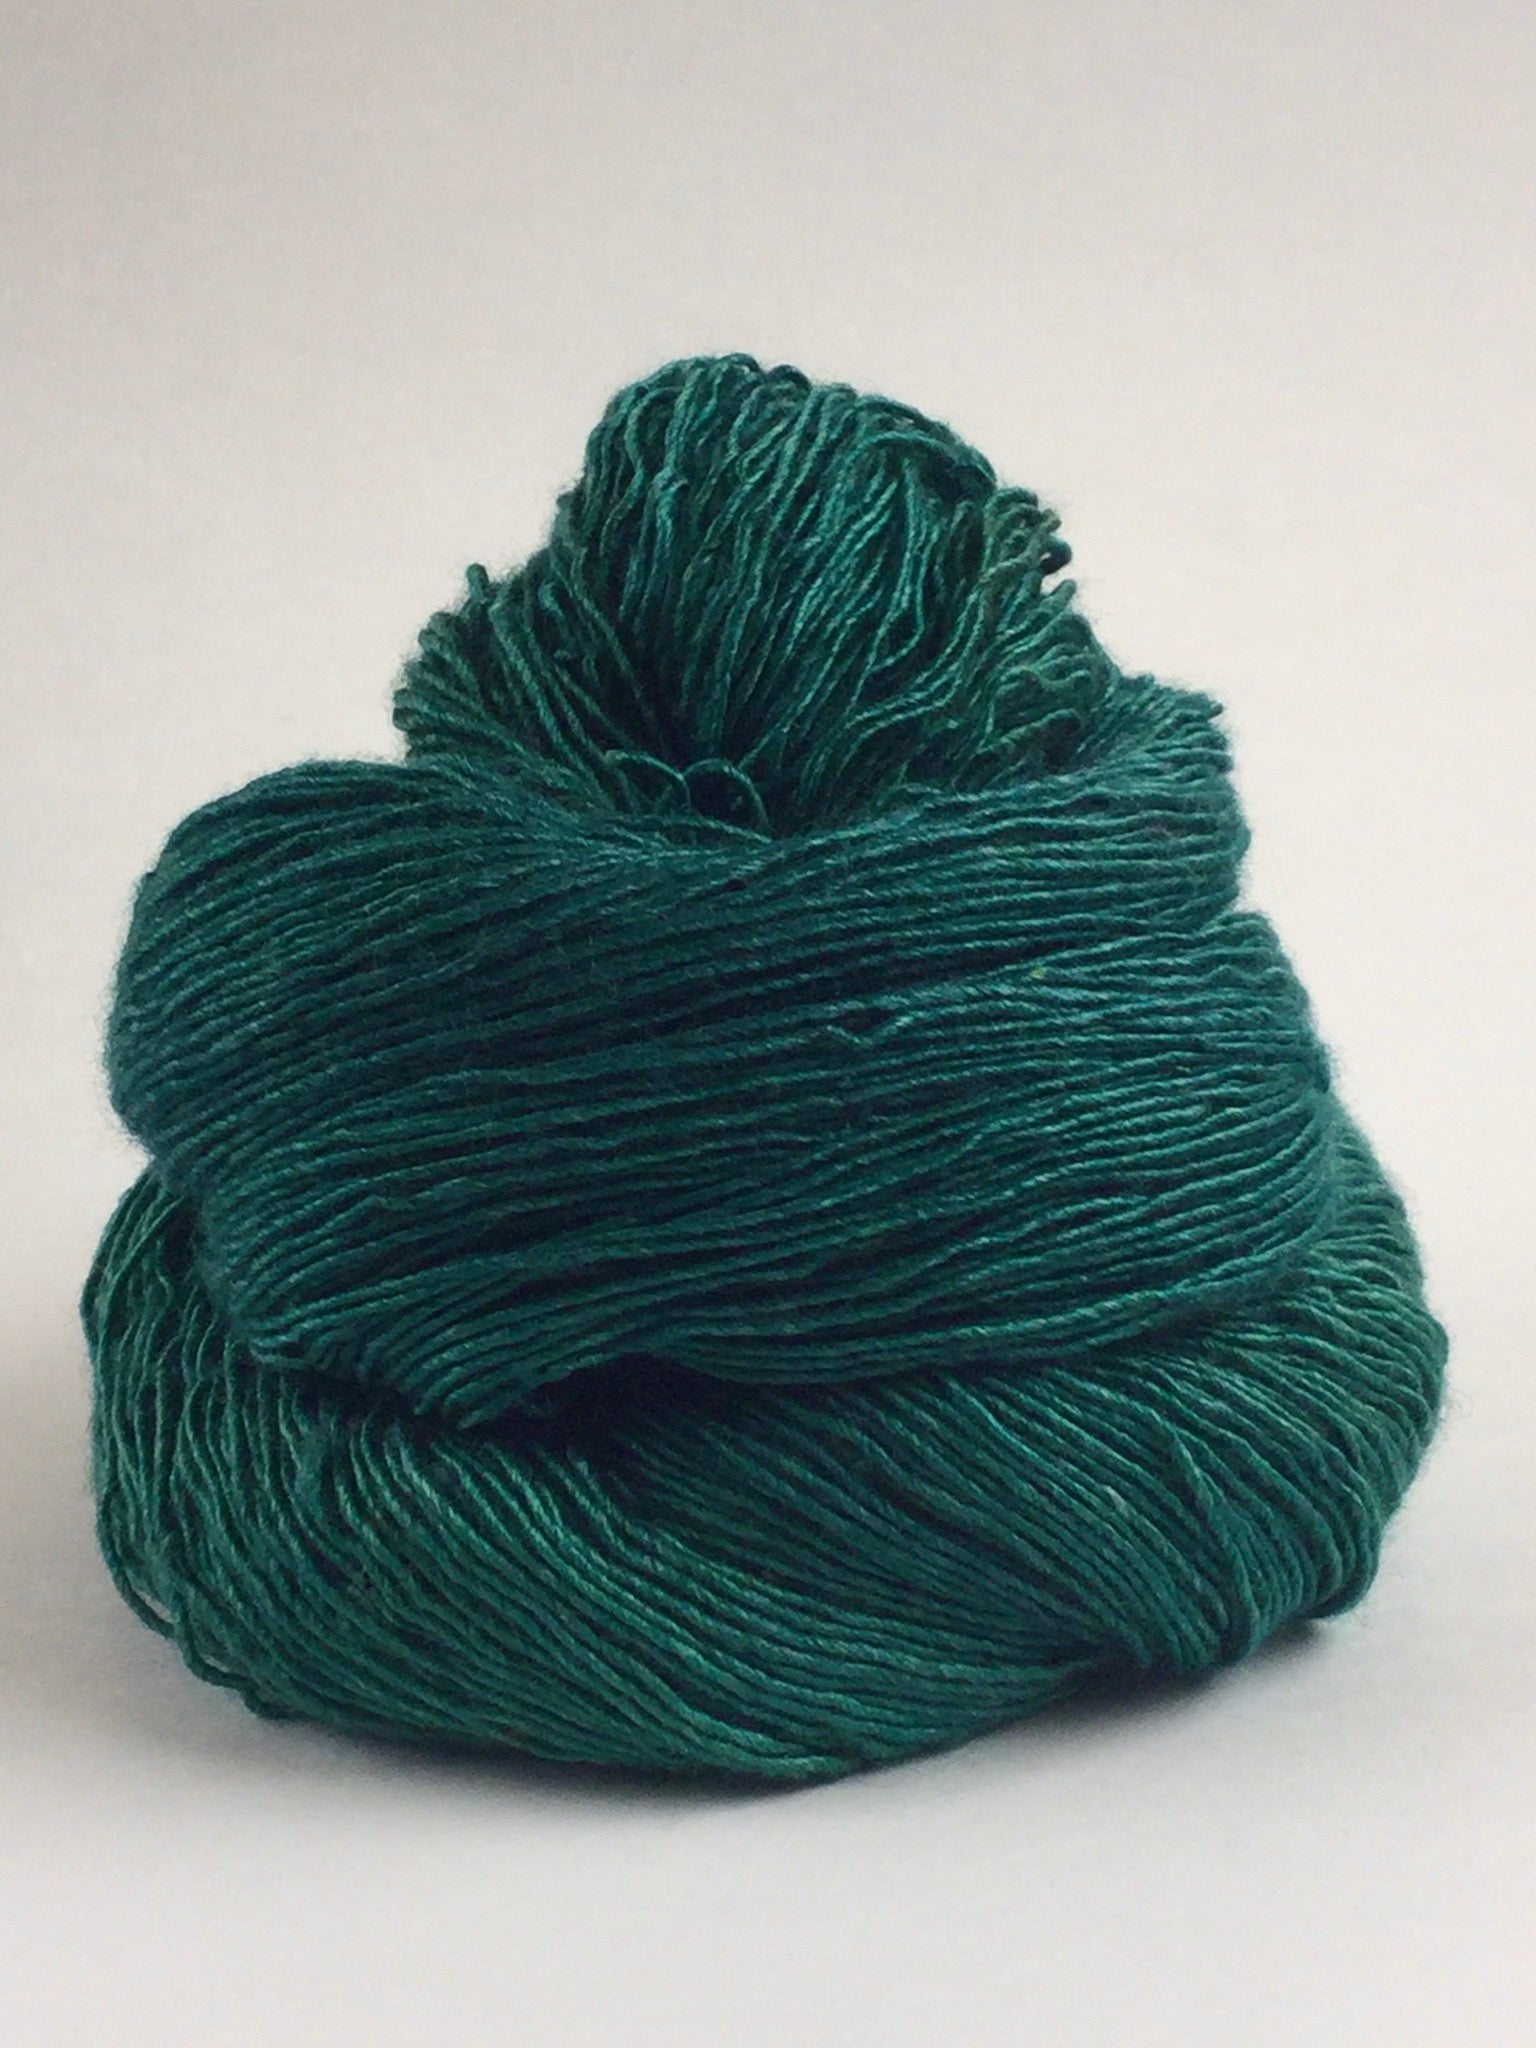 Redwood - River Silk and Merino from Tributary Yarns